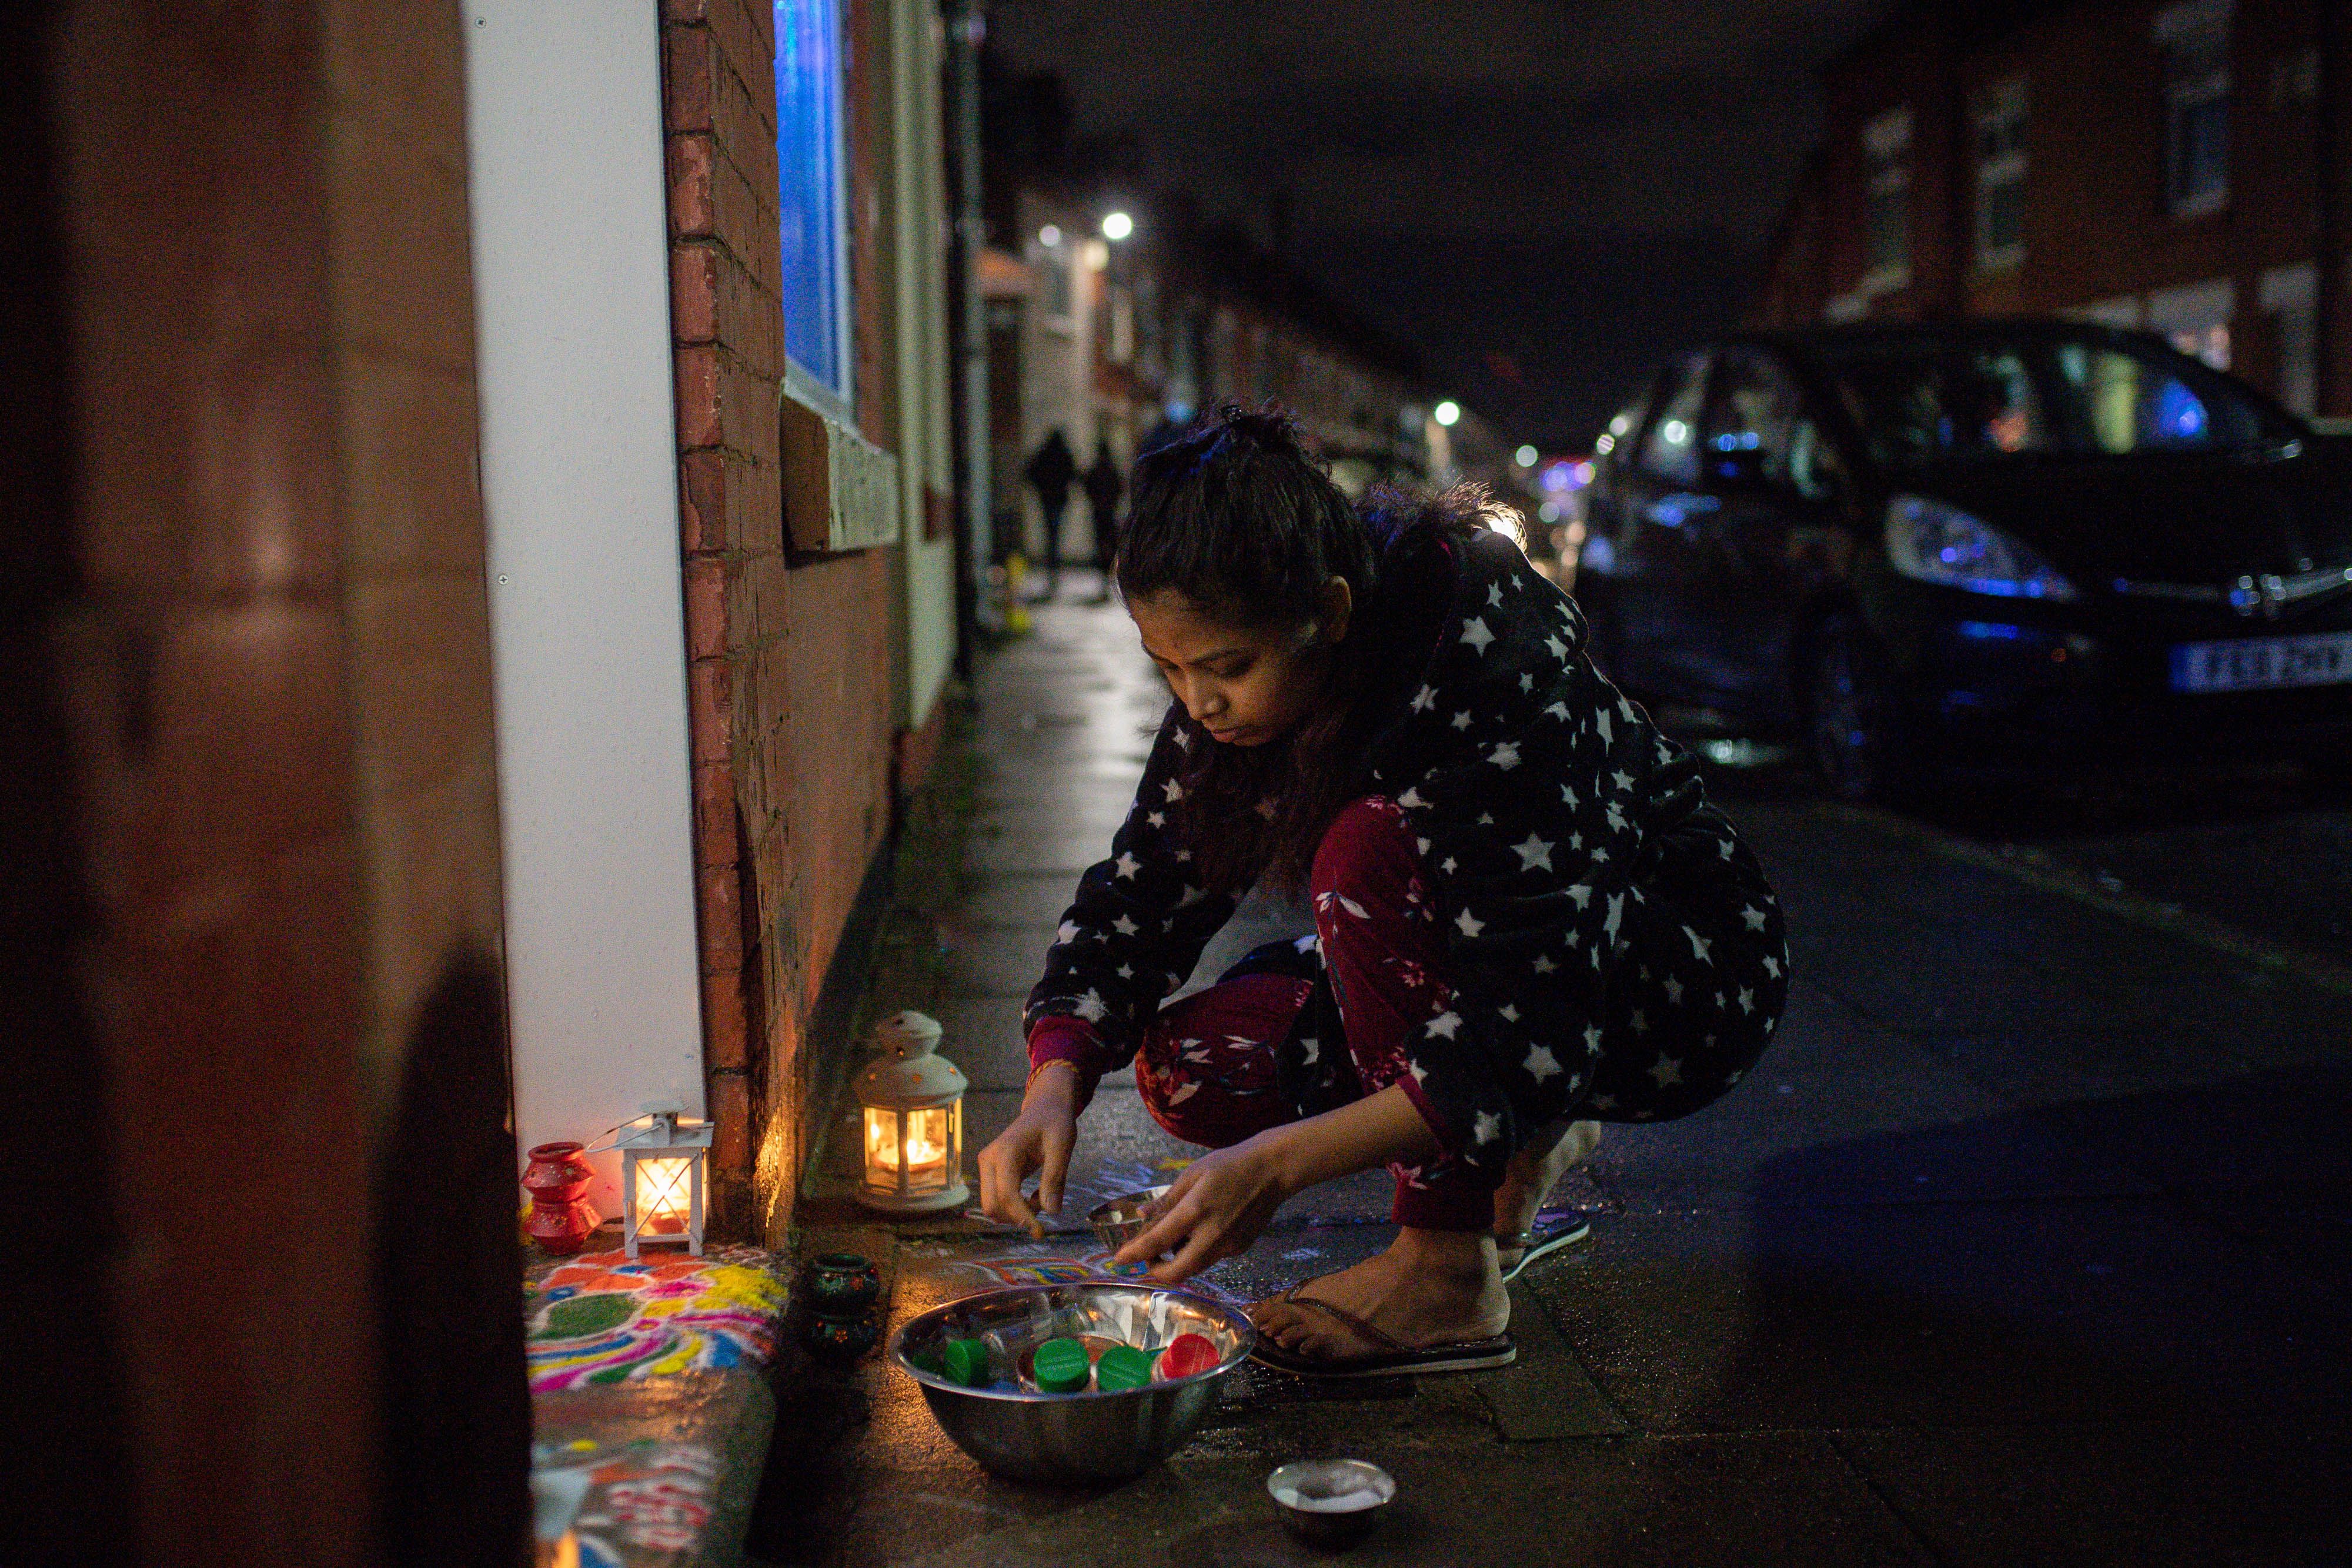 A lady decorates her doorstep during Dawali celebrations in Leicester this evening